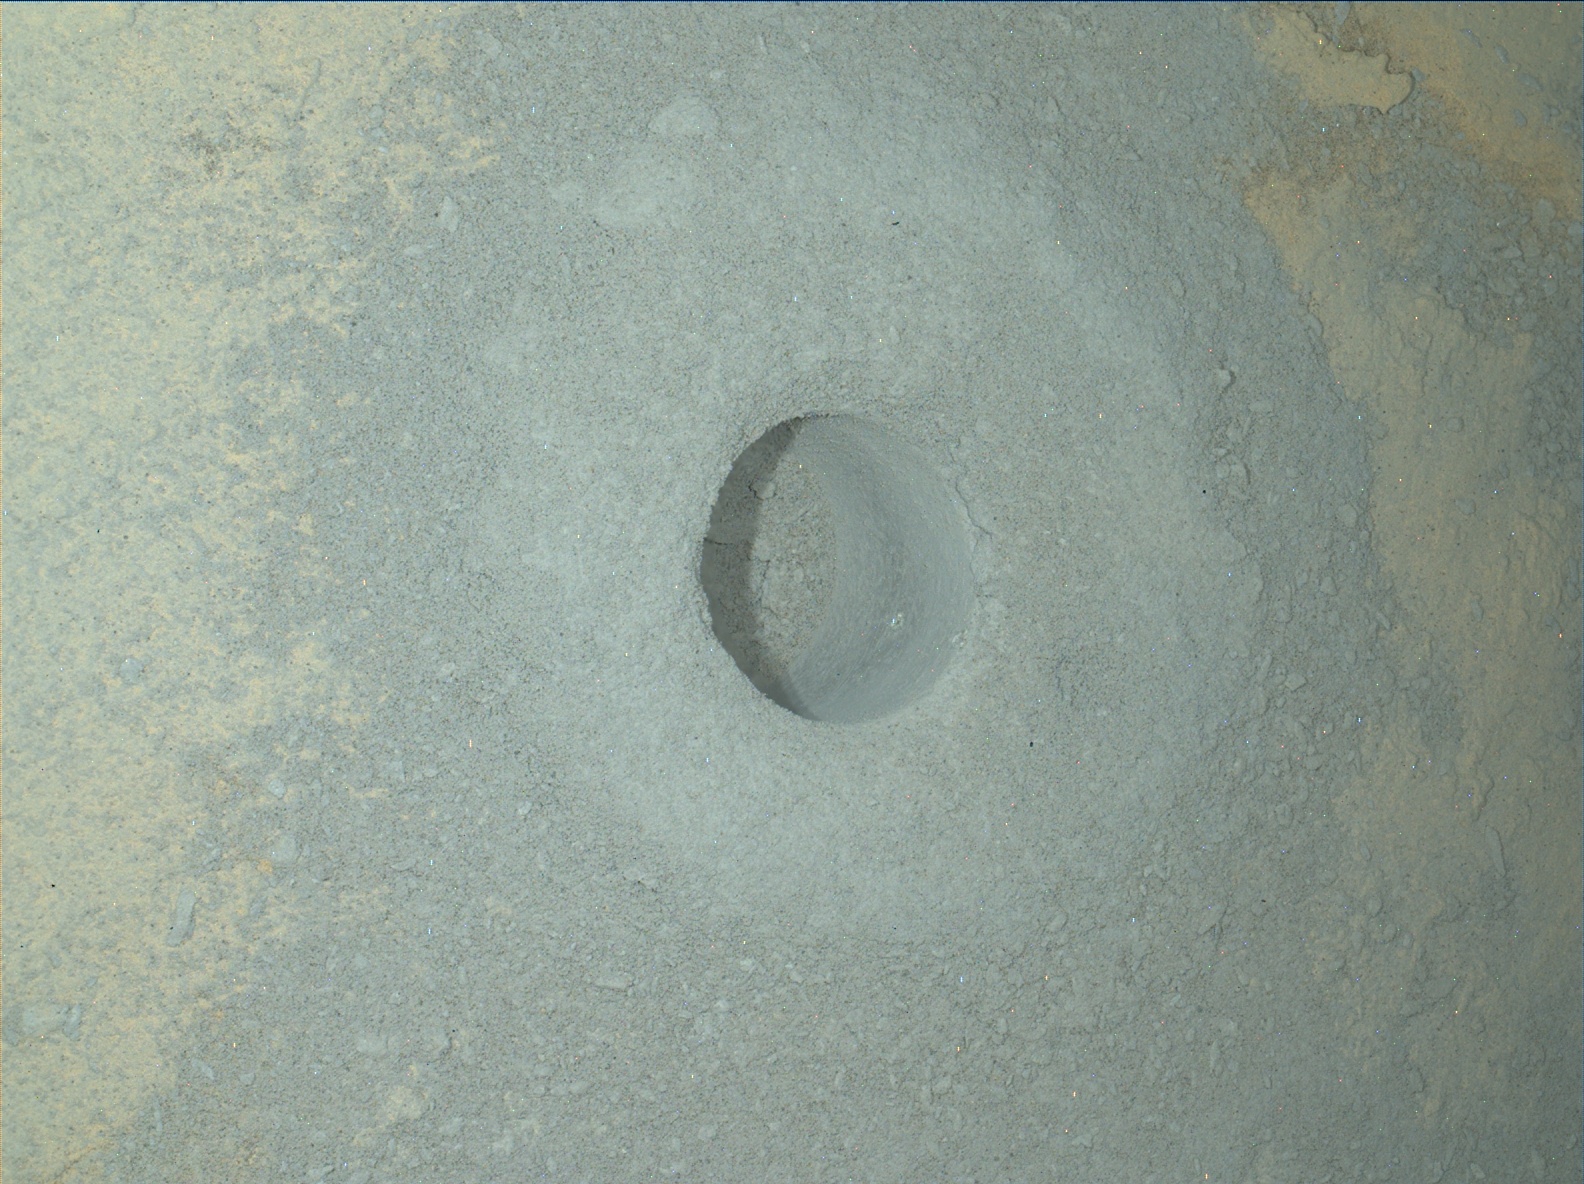 Nasa's Mars rover Curiosity acquired this image using its Mars Hand Lens Imager (MAHLI) on Sol 896